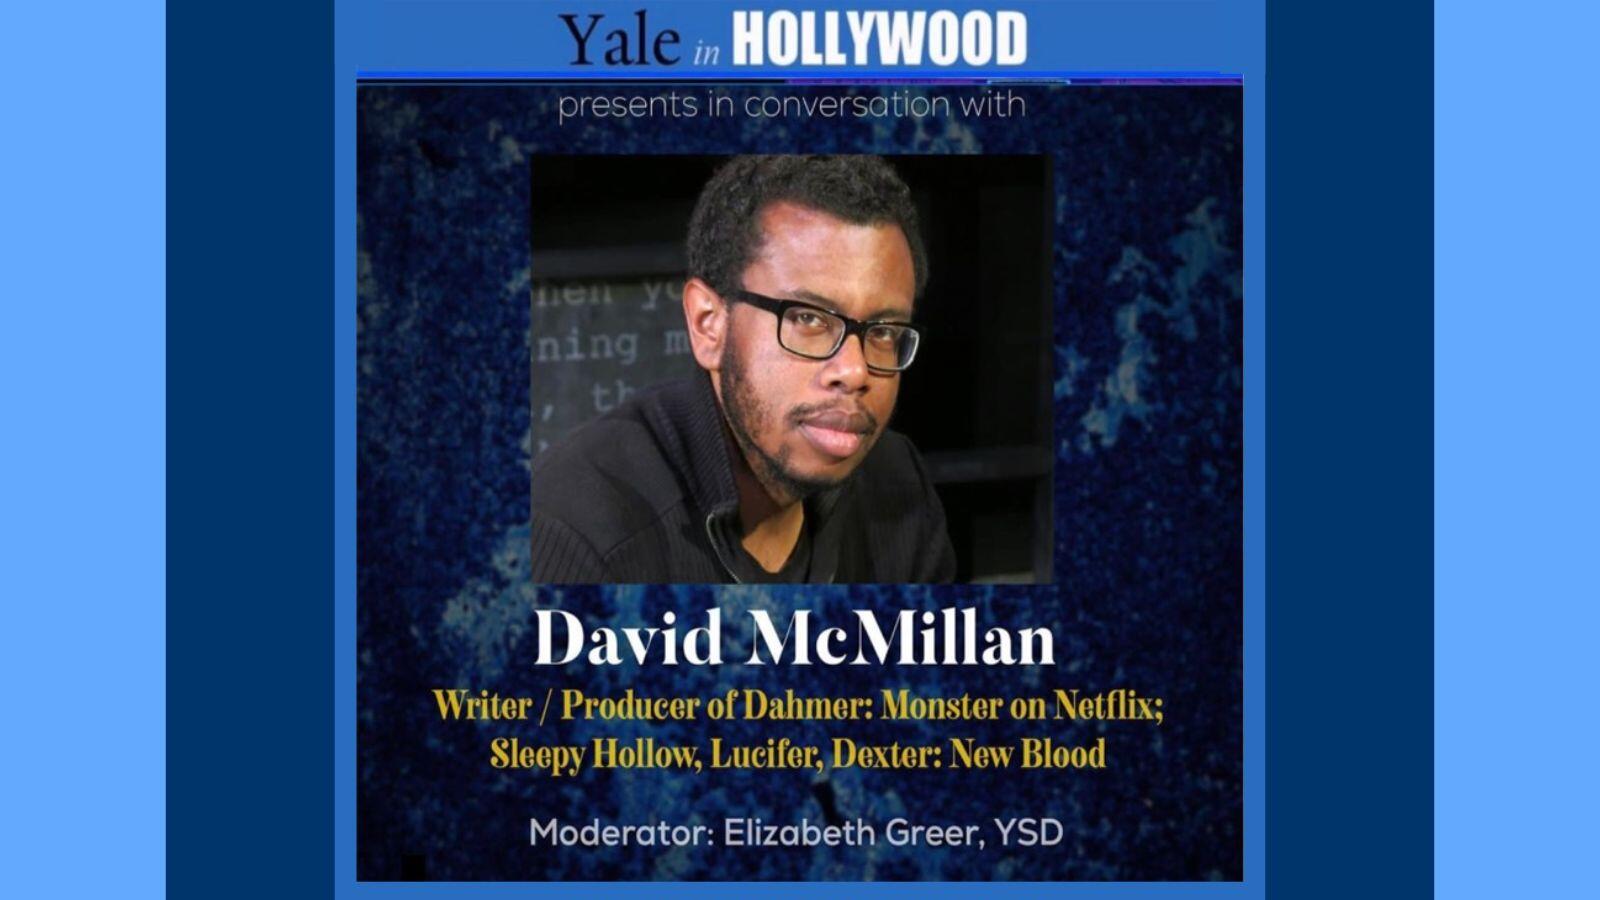 Yale in Hollywood: In Conversation with David McMillan